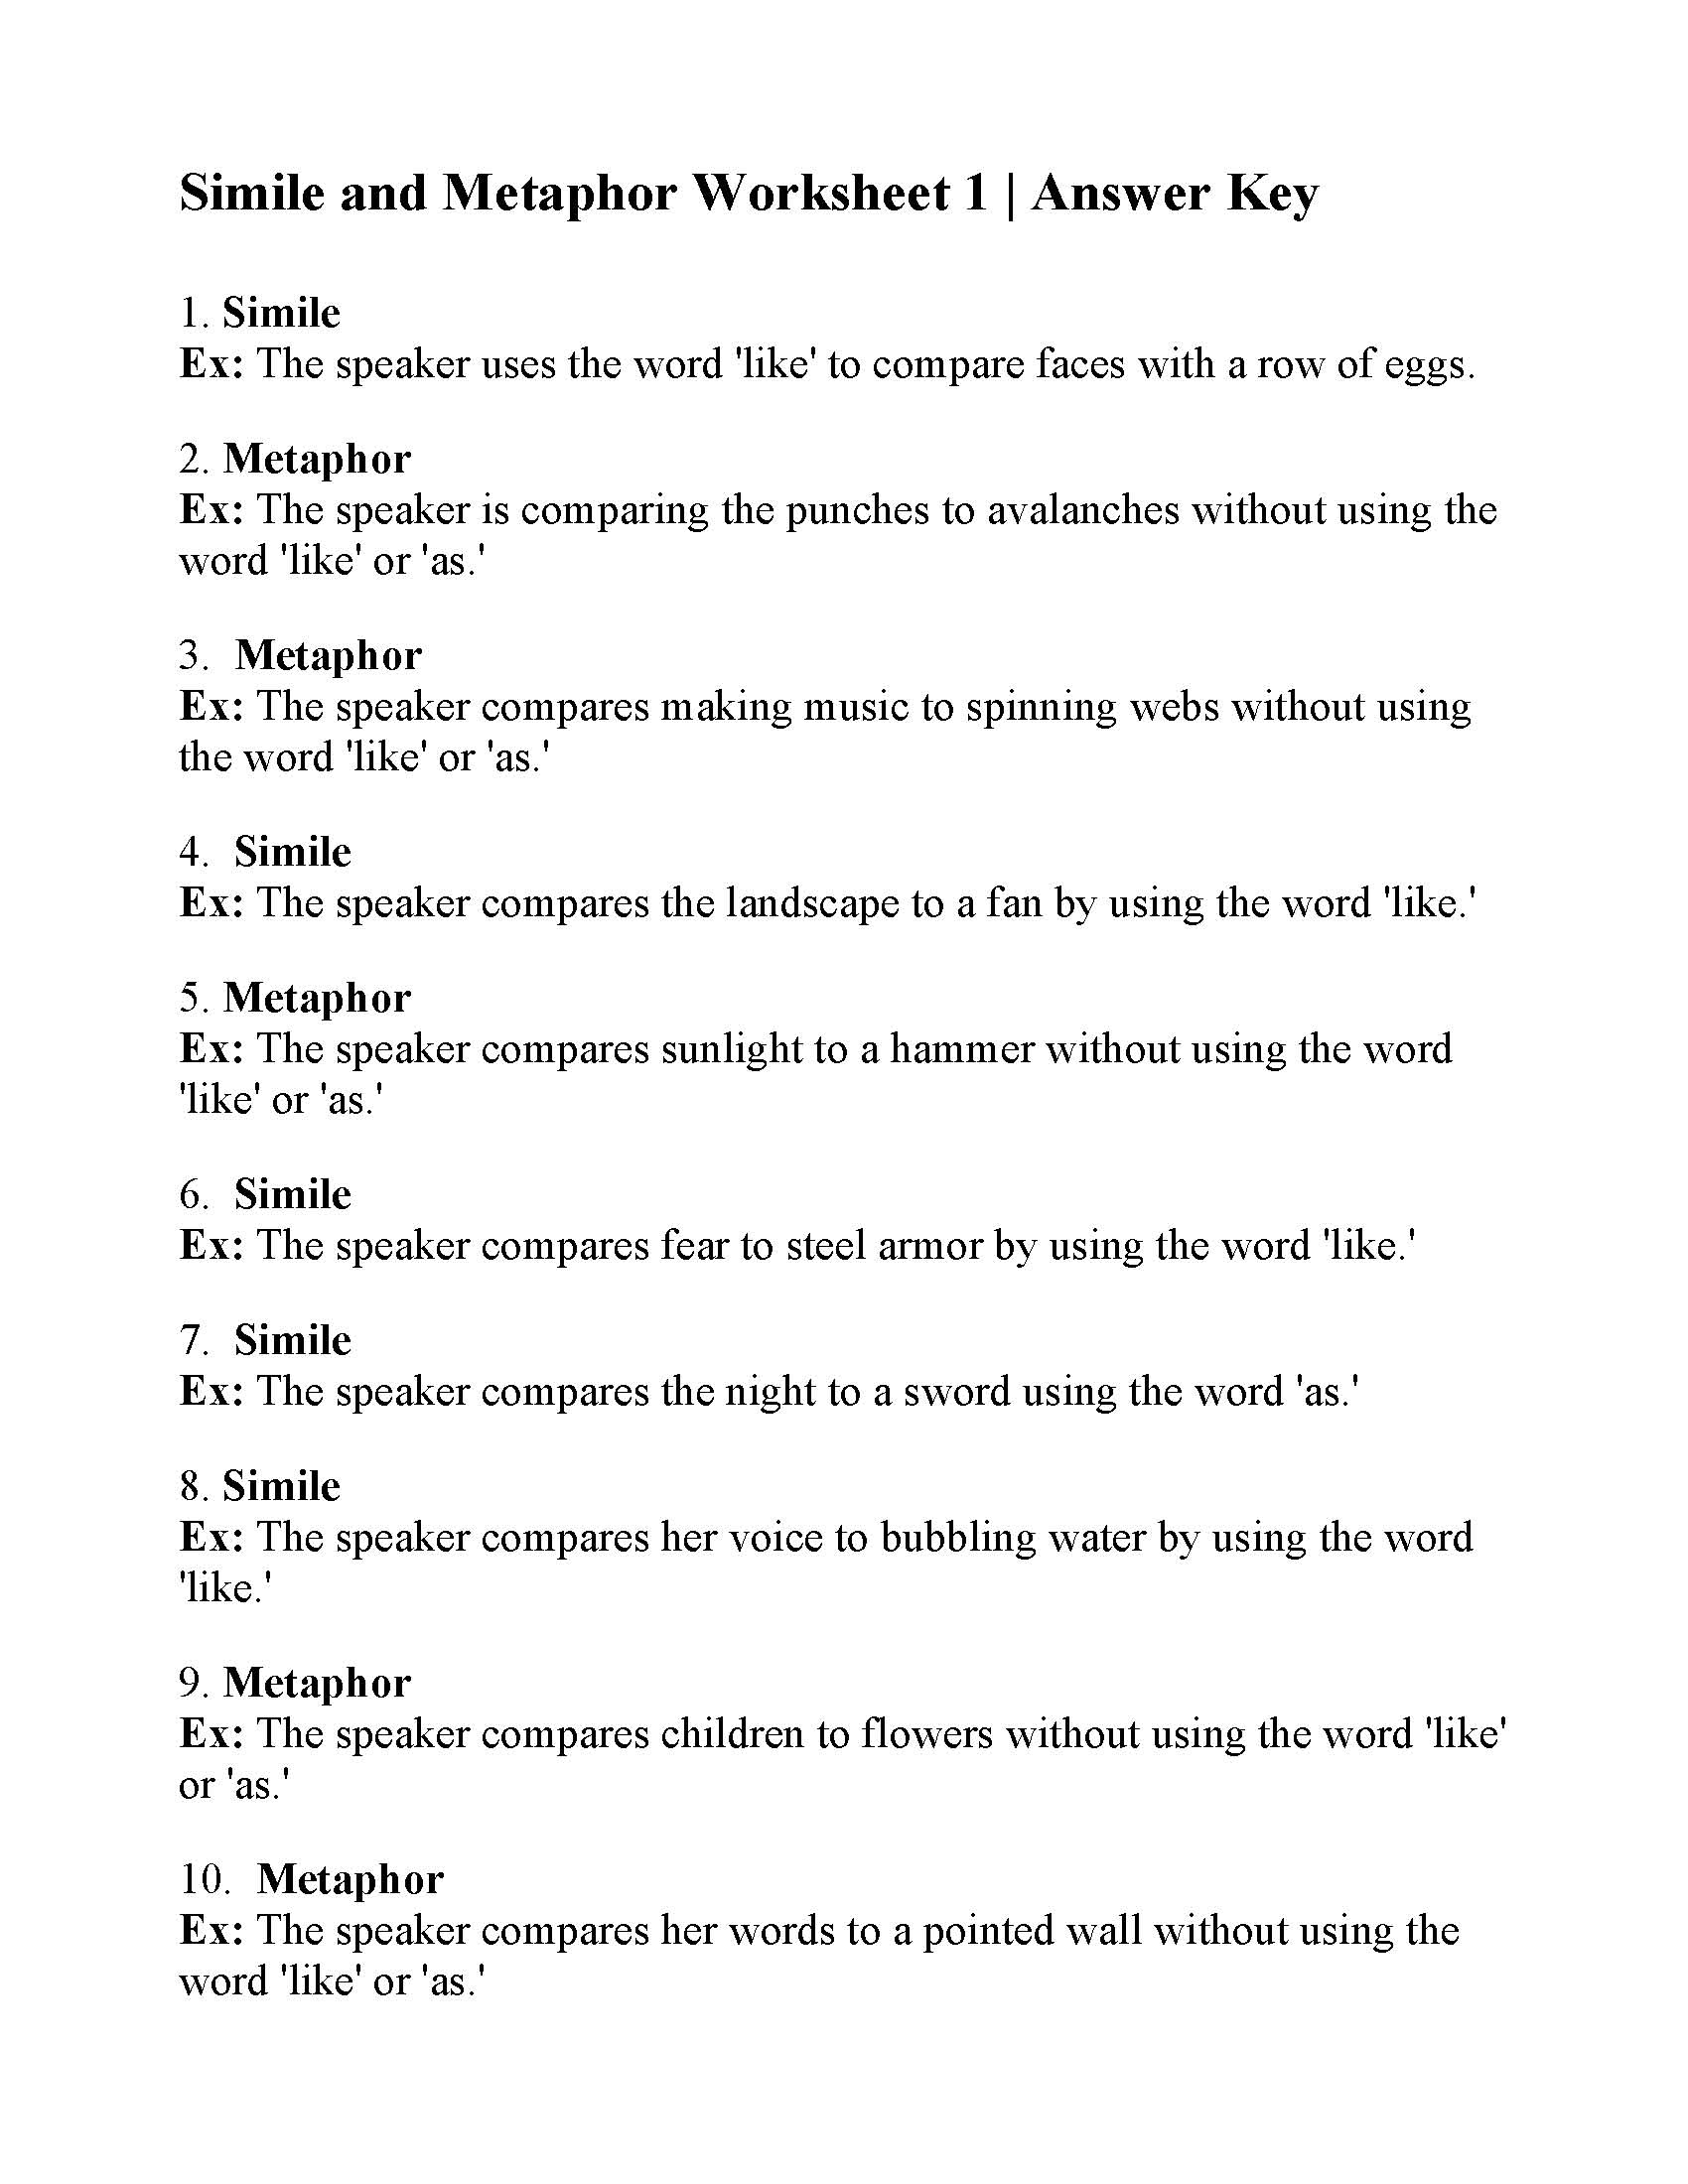 simile-and-metaphor-worksheet-1-answers